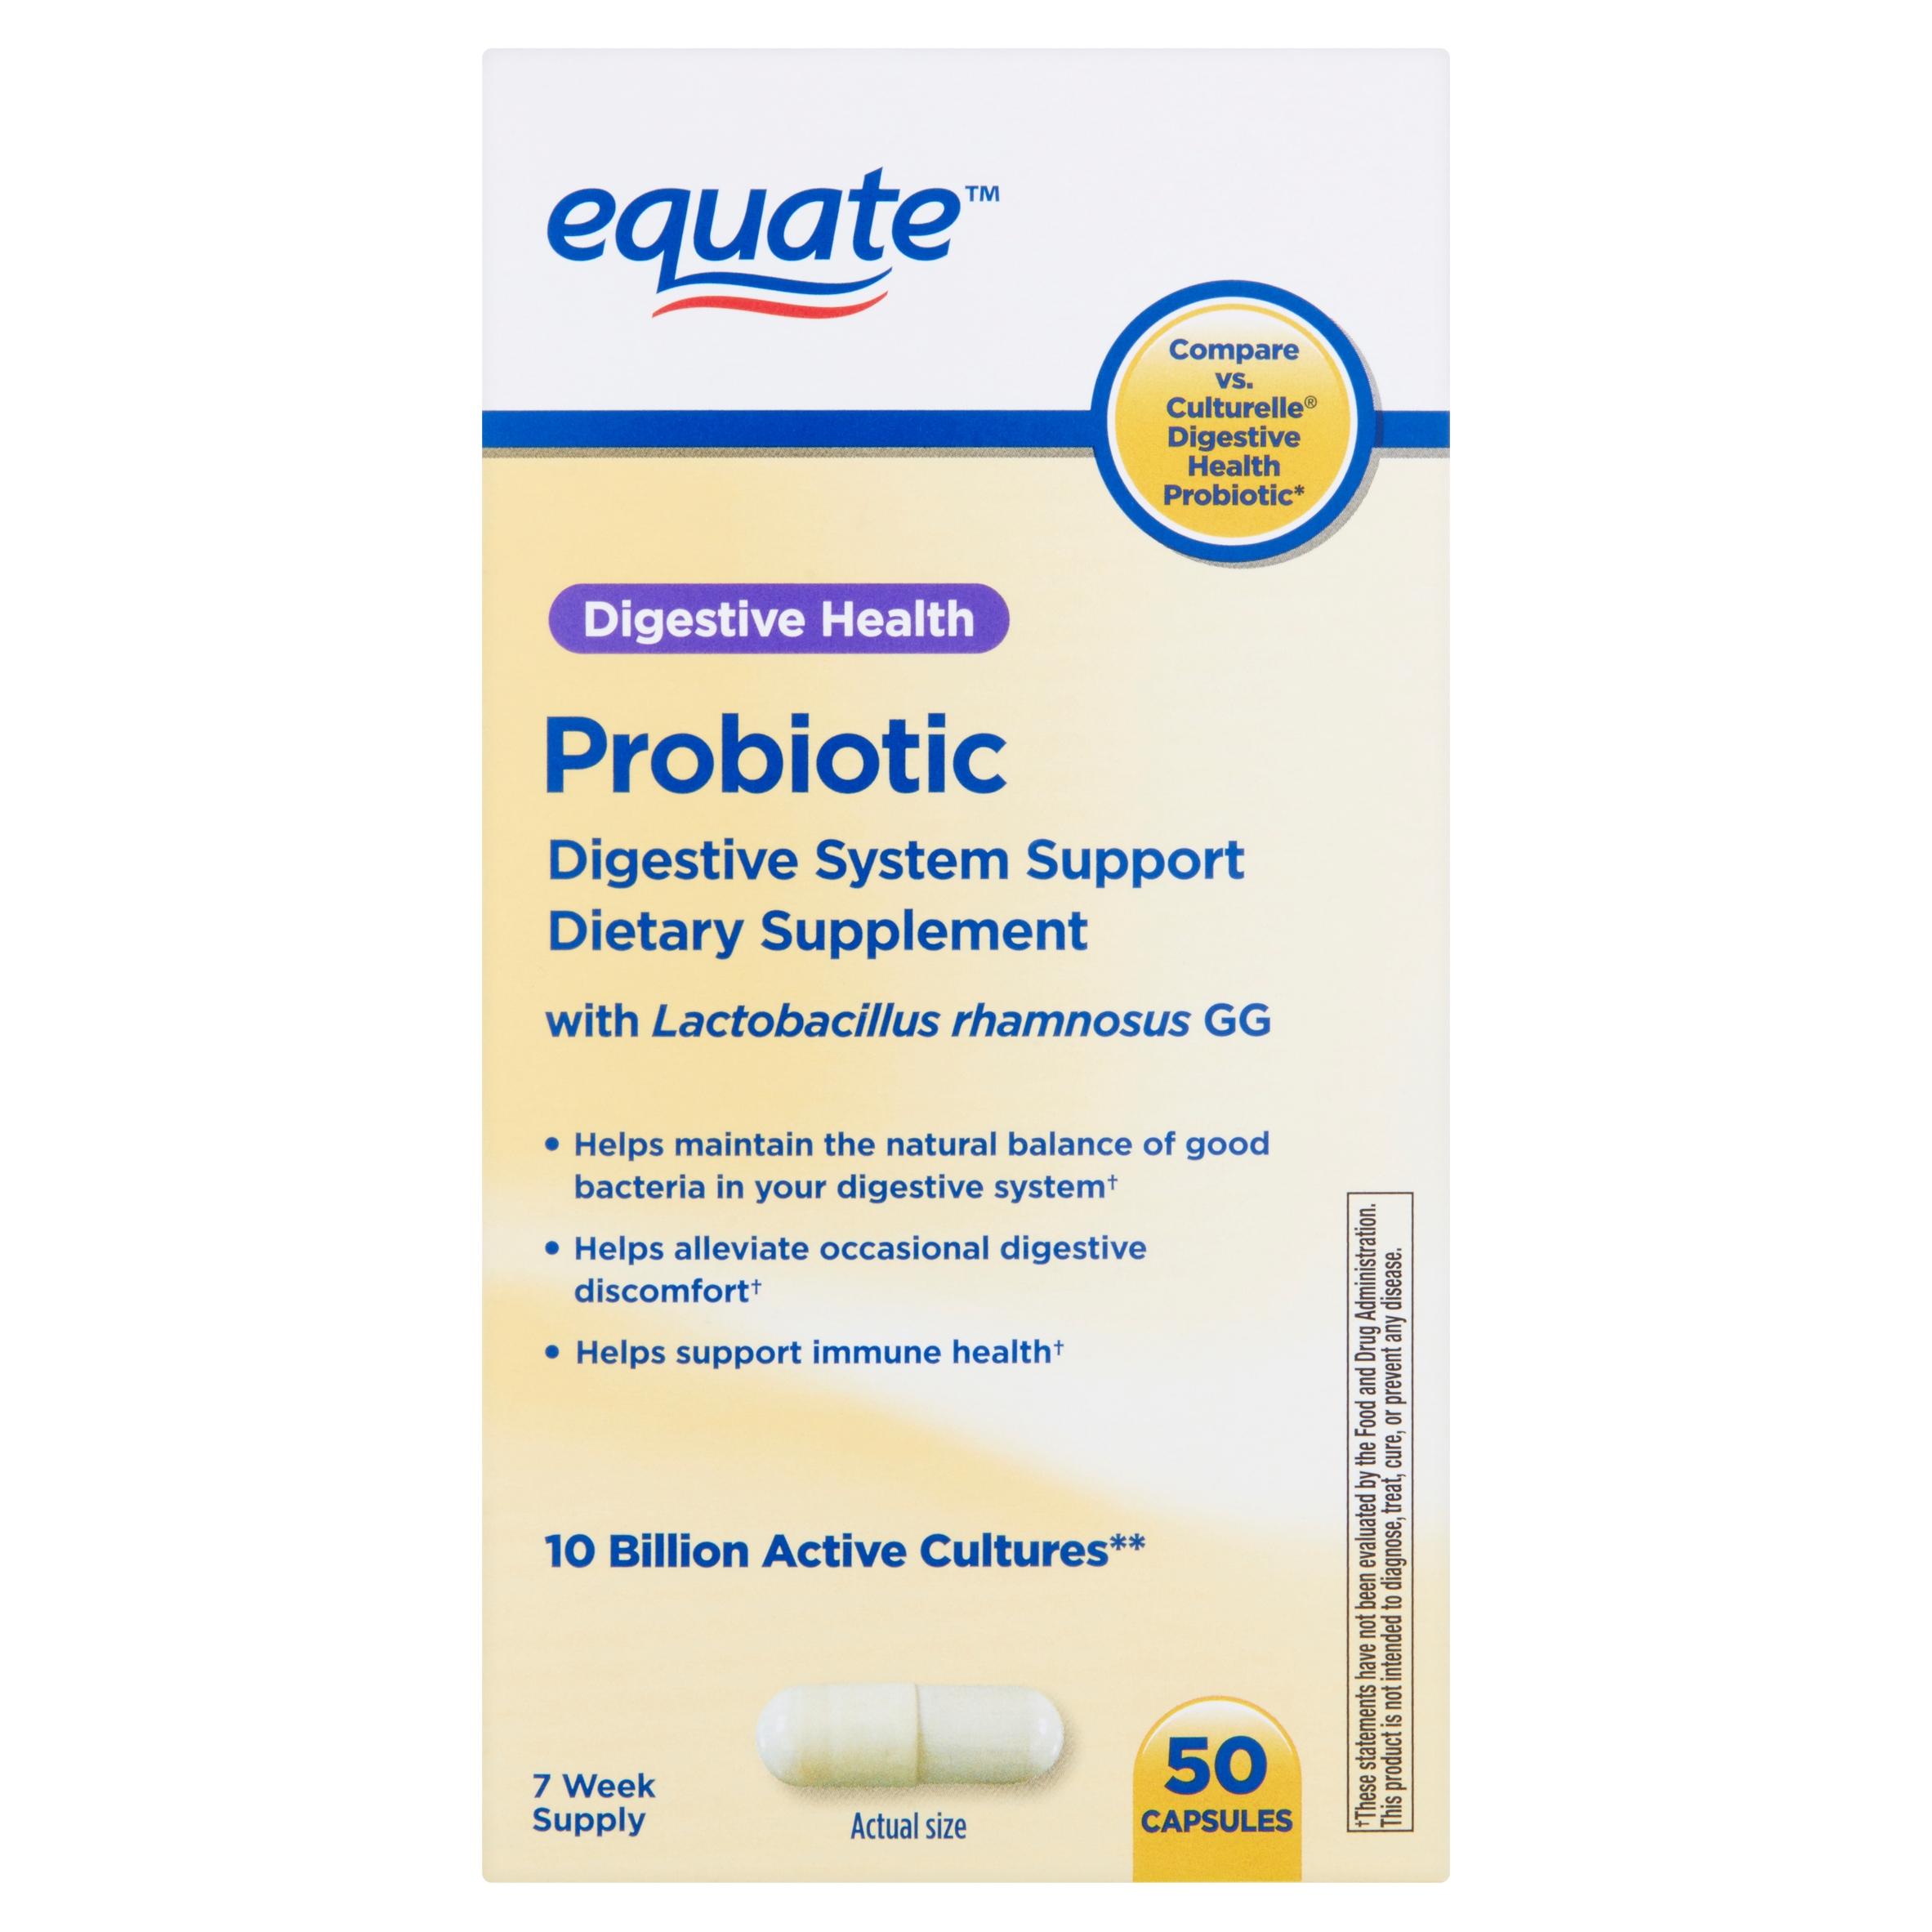 Equate Digestive Health Probiotic Capsules, 50 Count - image 3 of 11